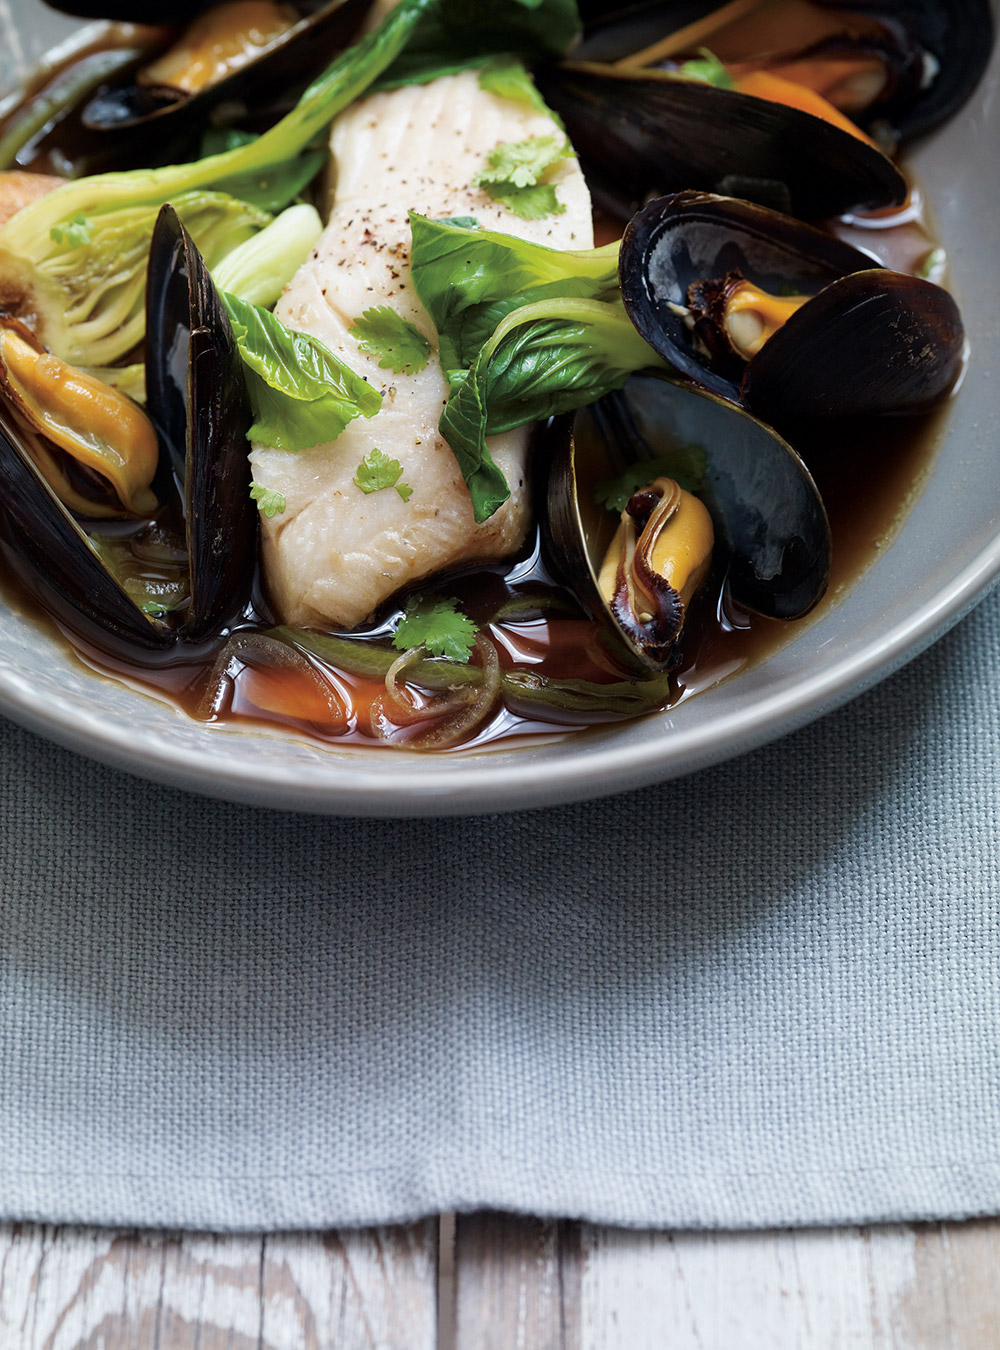 White Fish and Mussels Poached in Asian-Style Broth